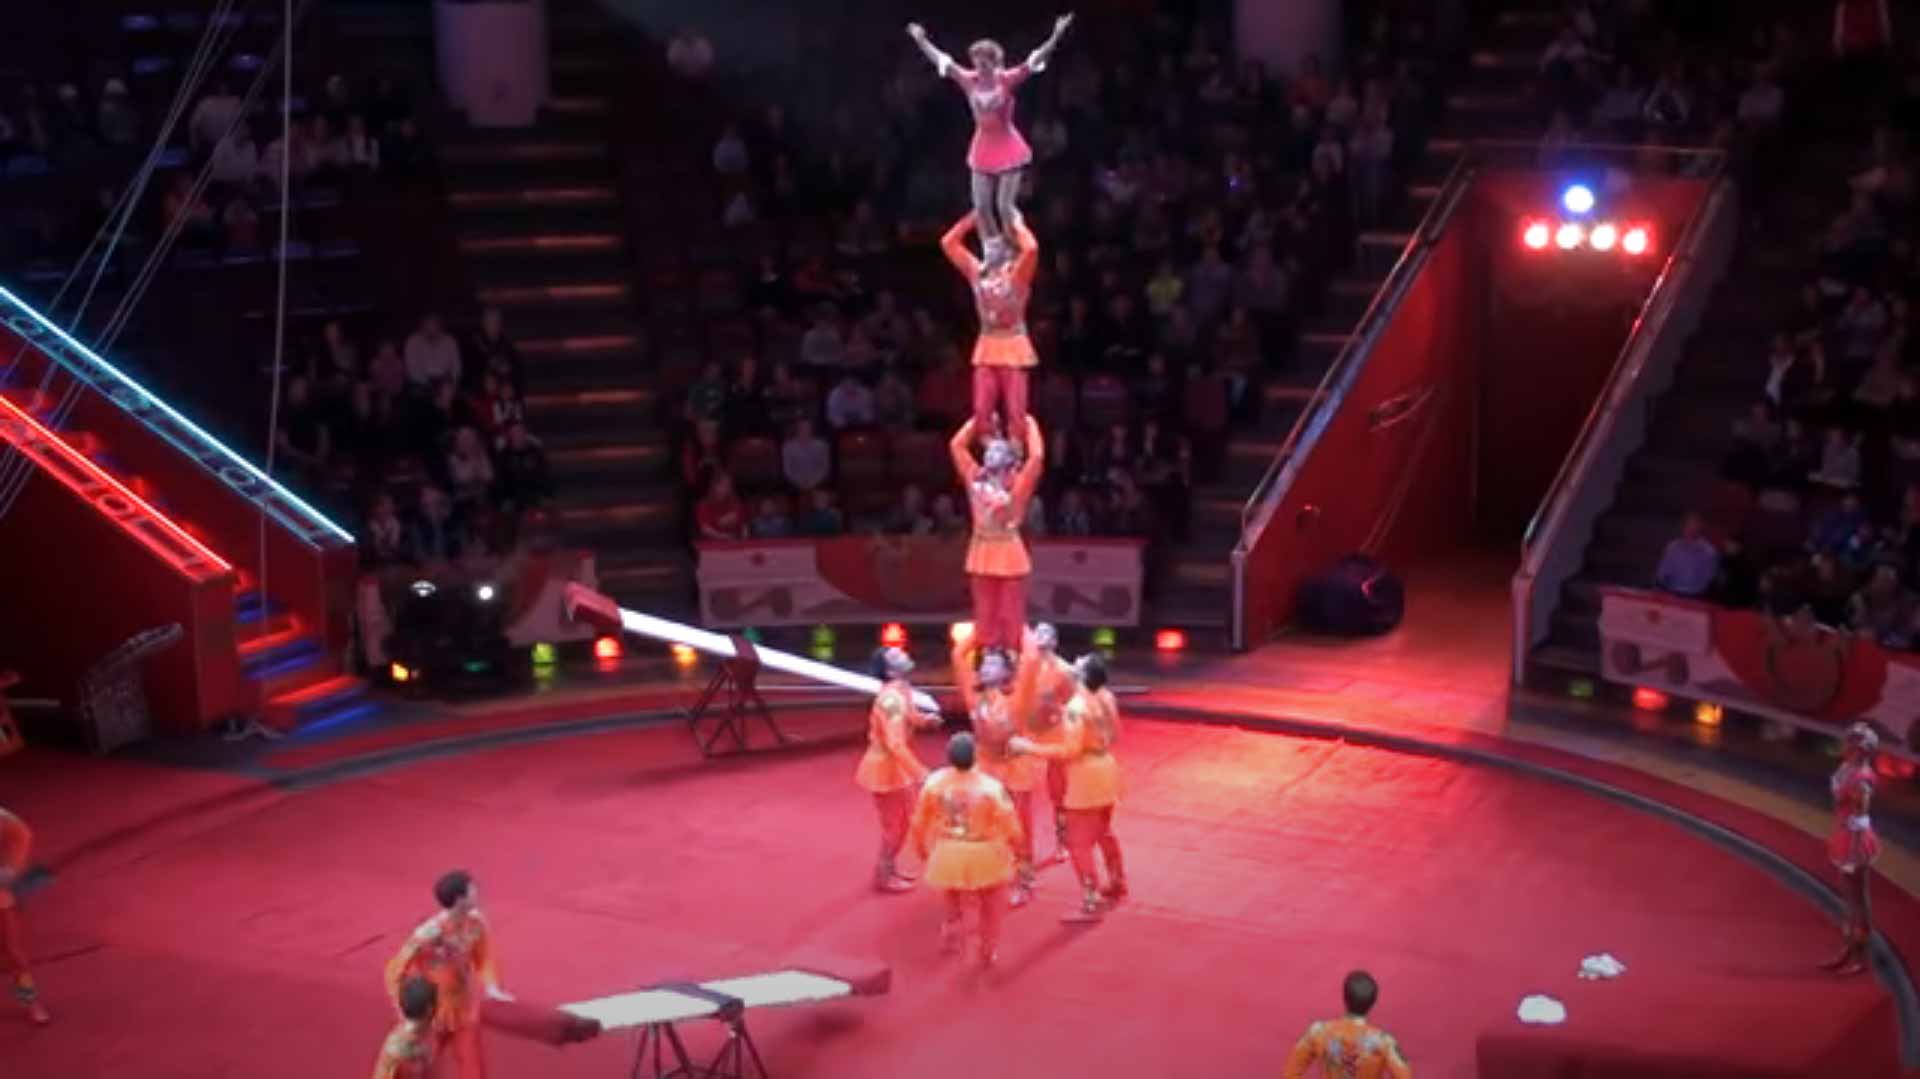 Most Amazing Circus Act You Have Ever Seen Image10 